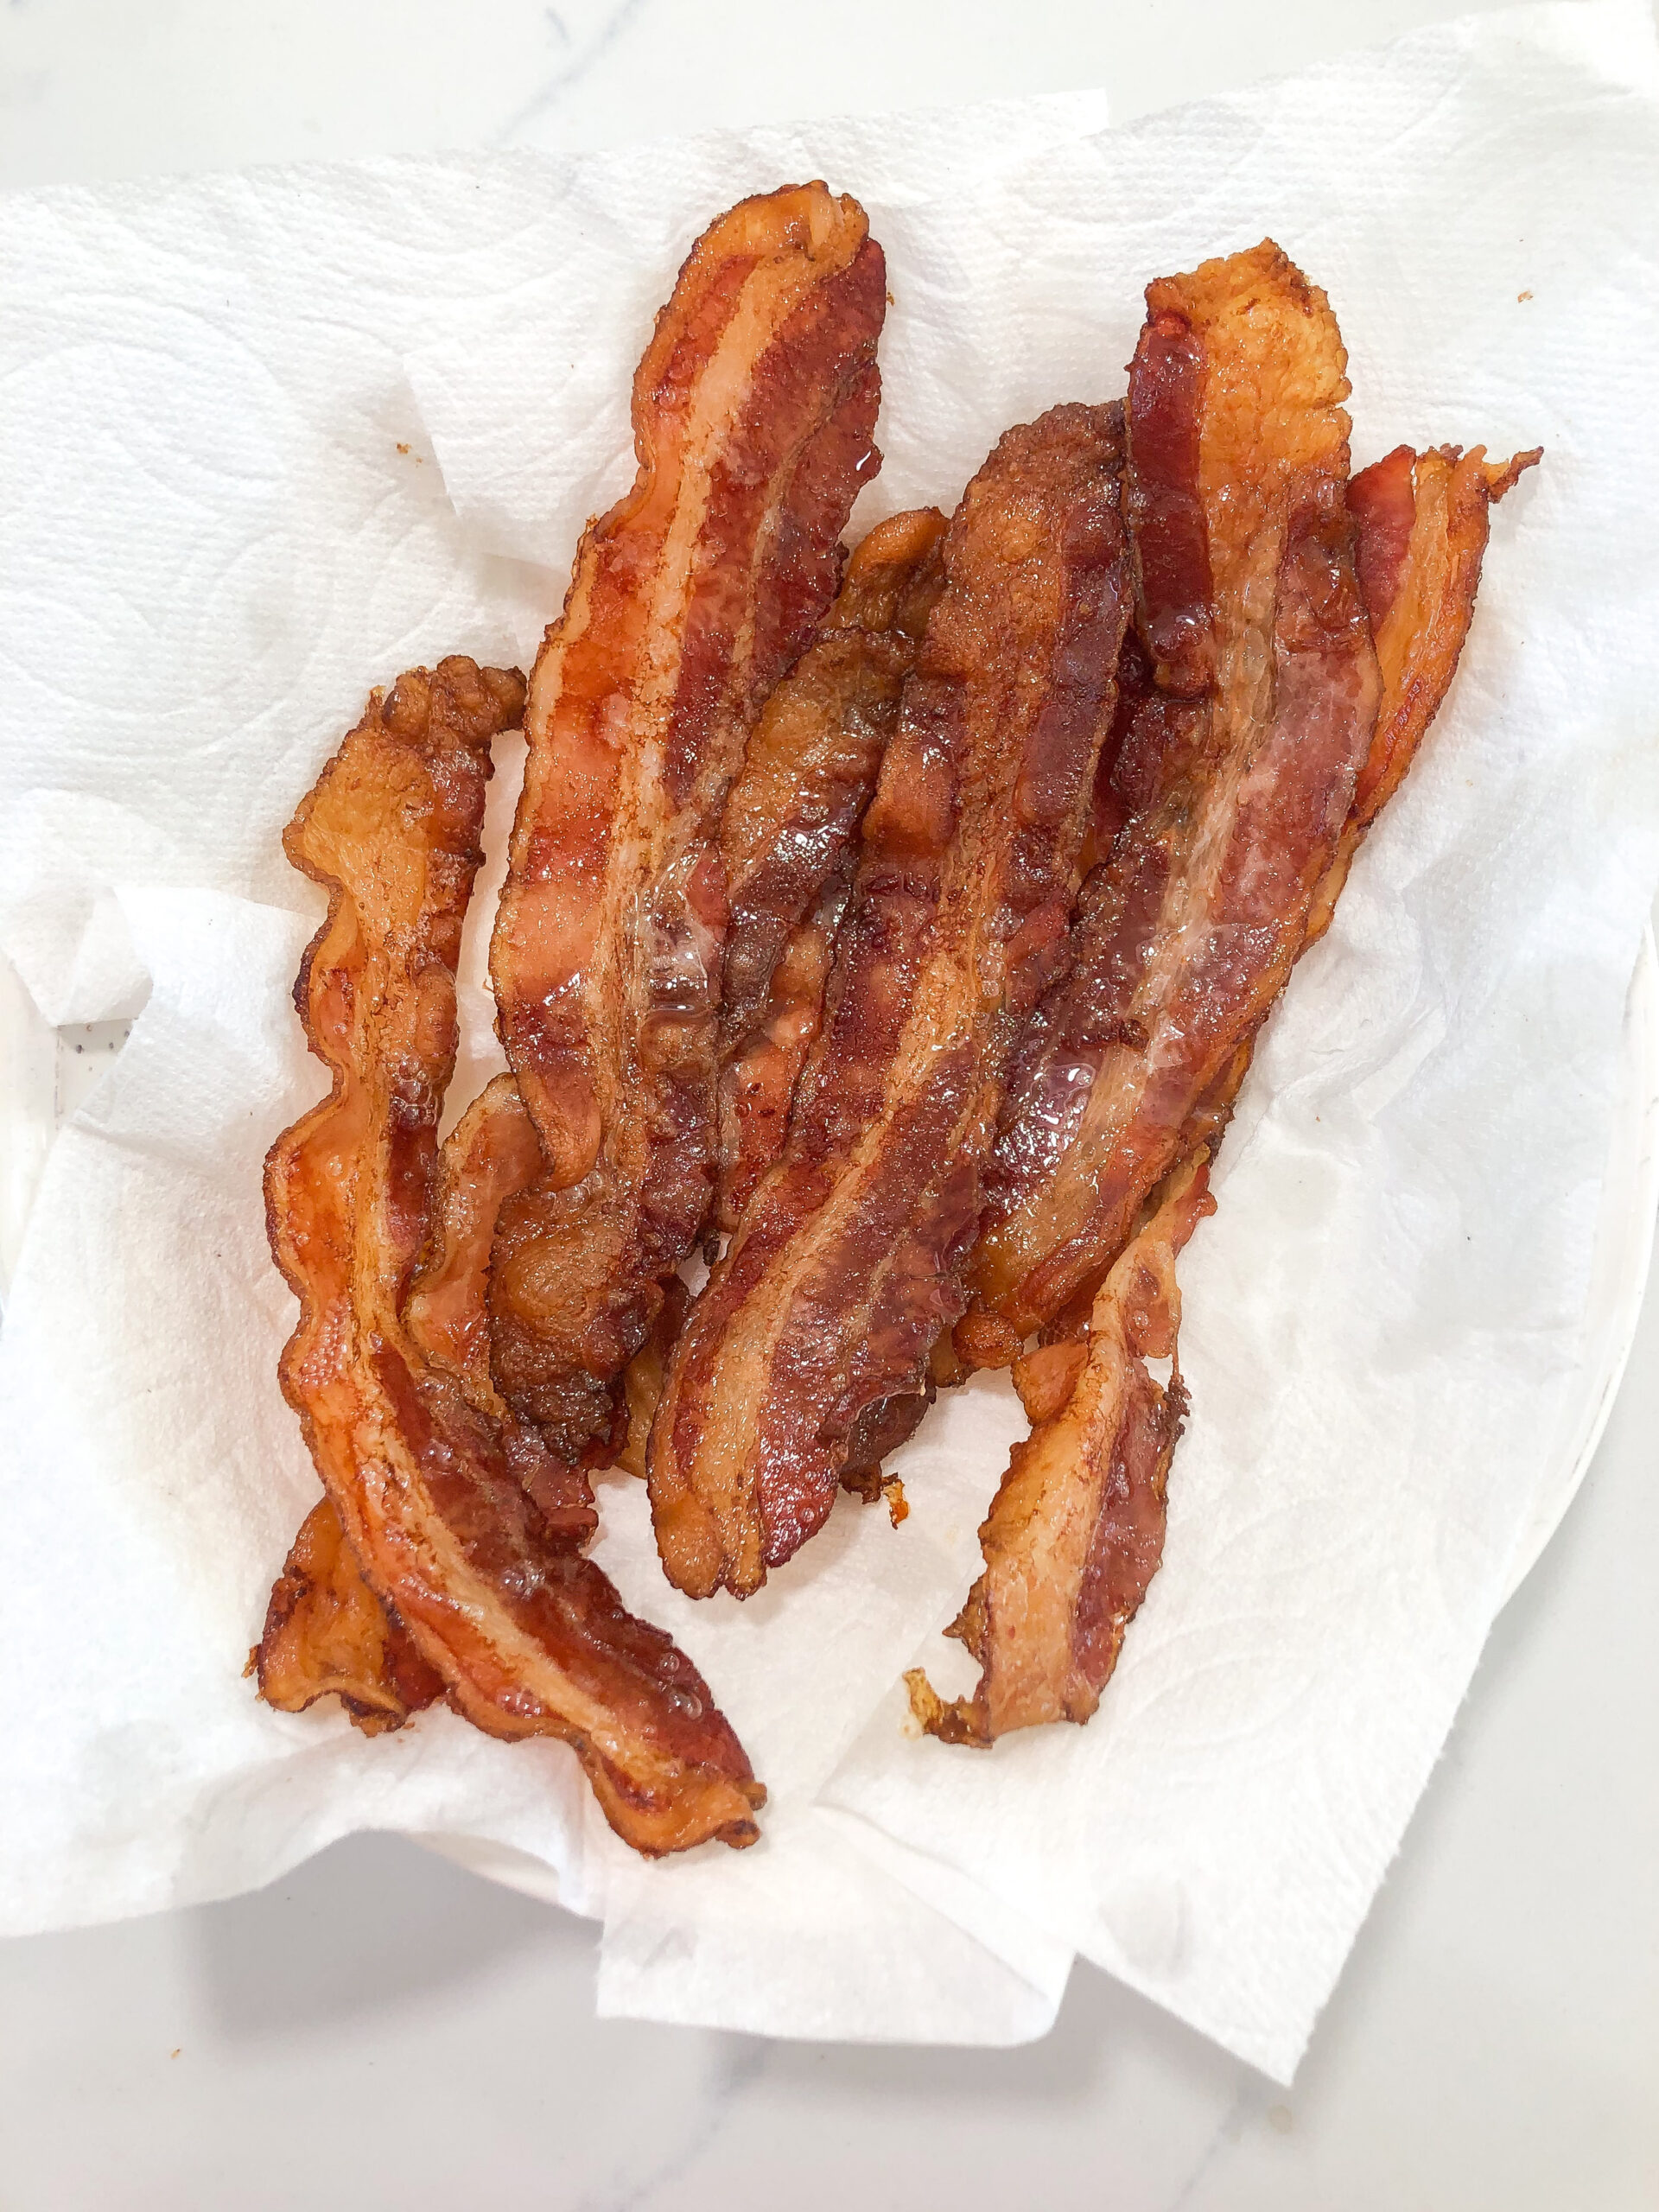 Oven Cooked Bacon: Easy, Hands-Free, Whole30, Keto - Whole Kitchen